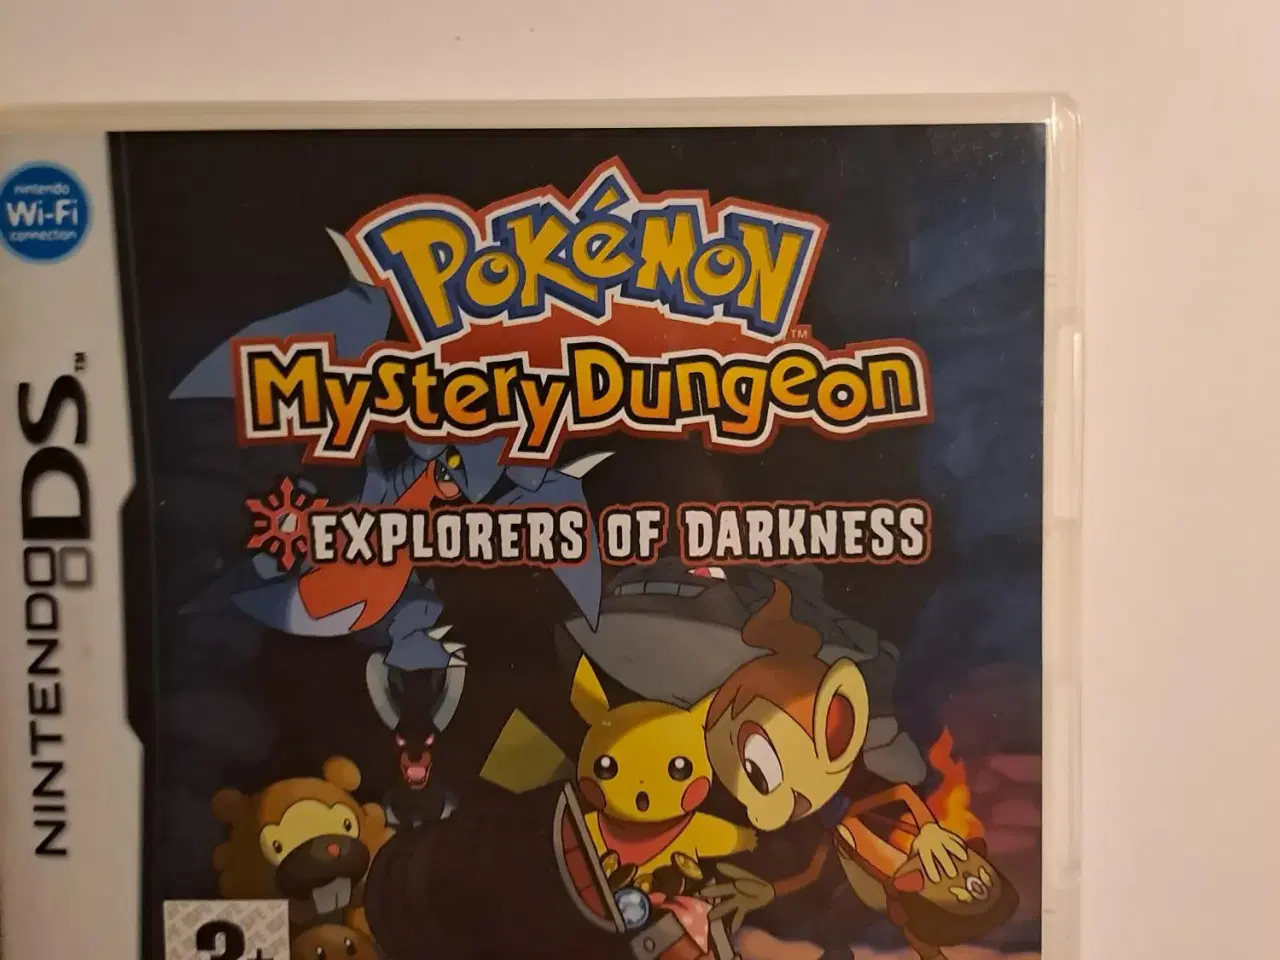 Billede 1 - Pokemon Mystery Dungeon Explores of the darkness